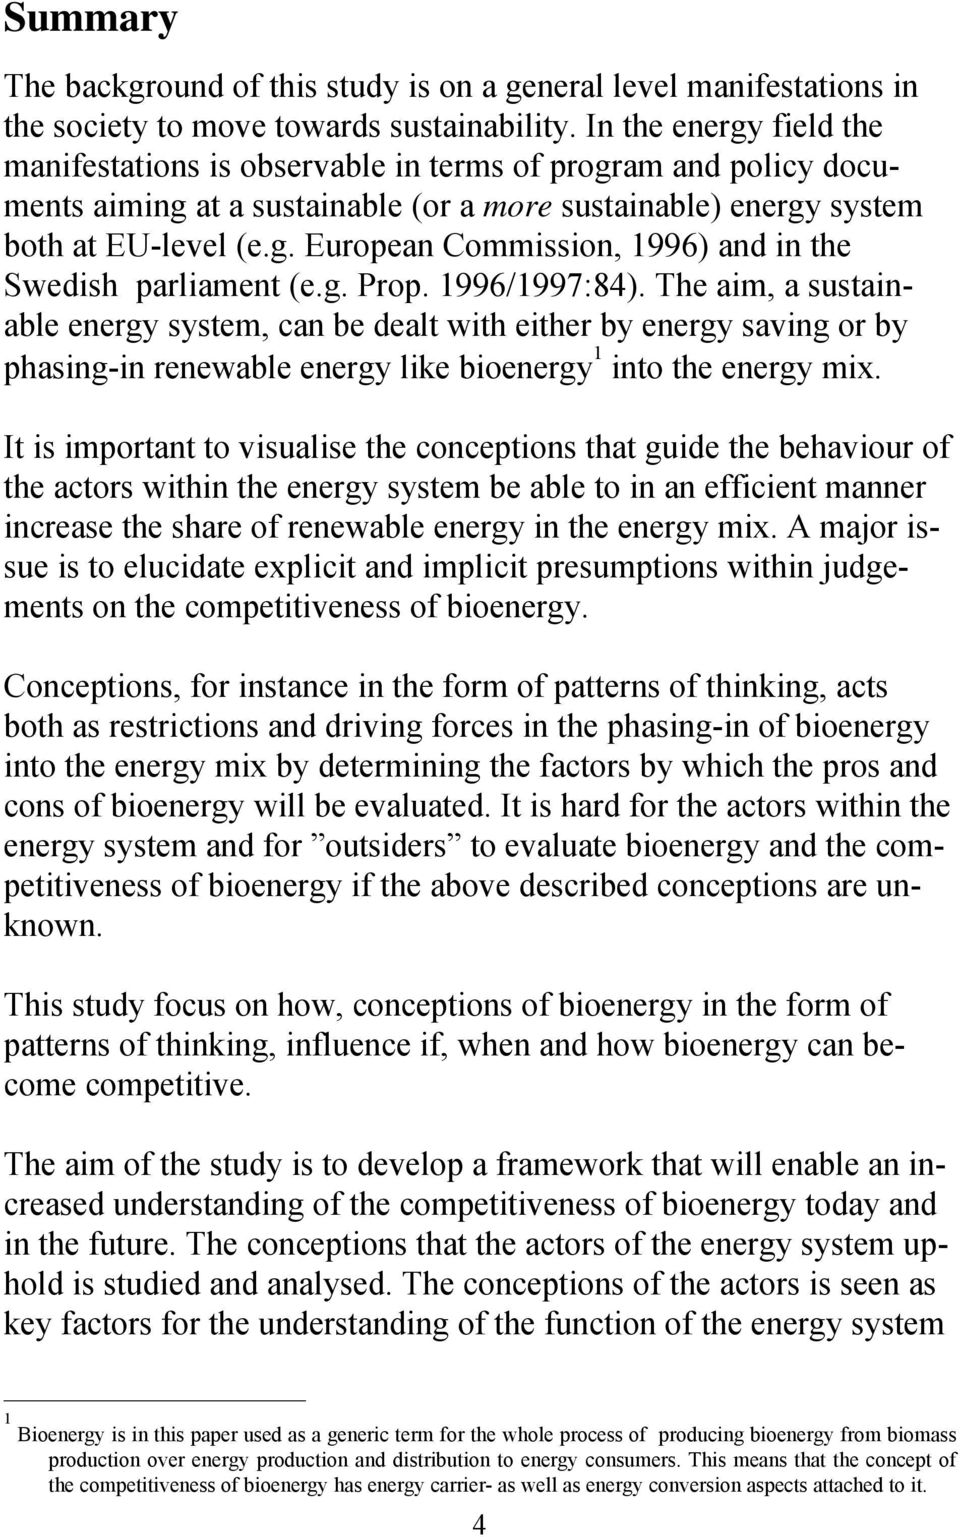 g. Prop. 1996/1997:84). The aim, a sustainable energy system, can be dealt with either by energy saving or by phasing-in renewable energy like bioenergy 1 into the energy mix.